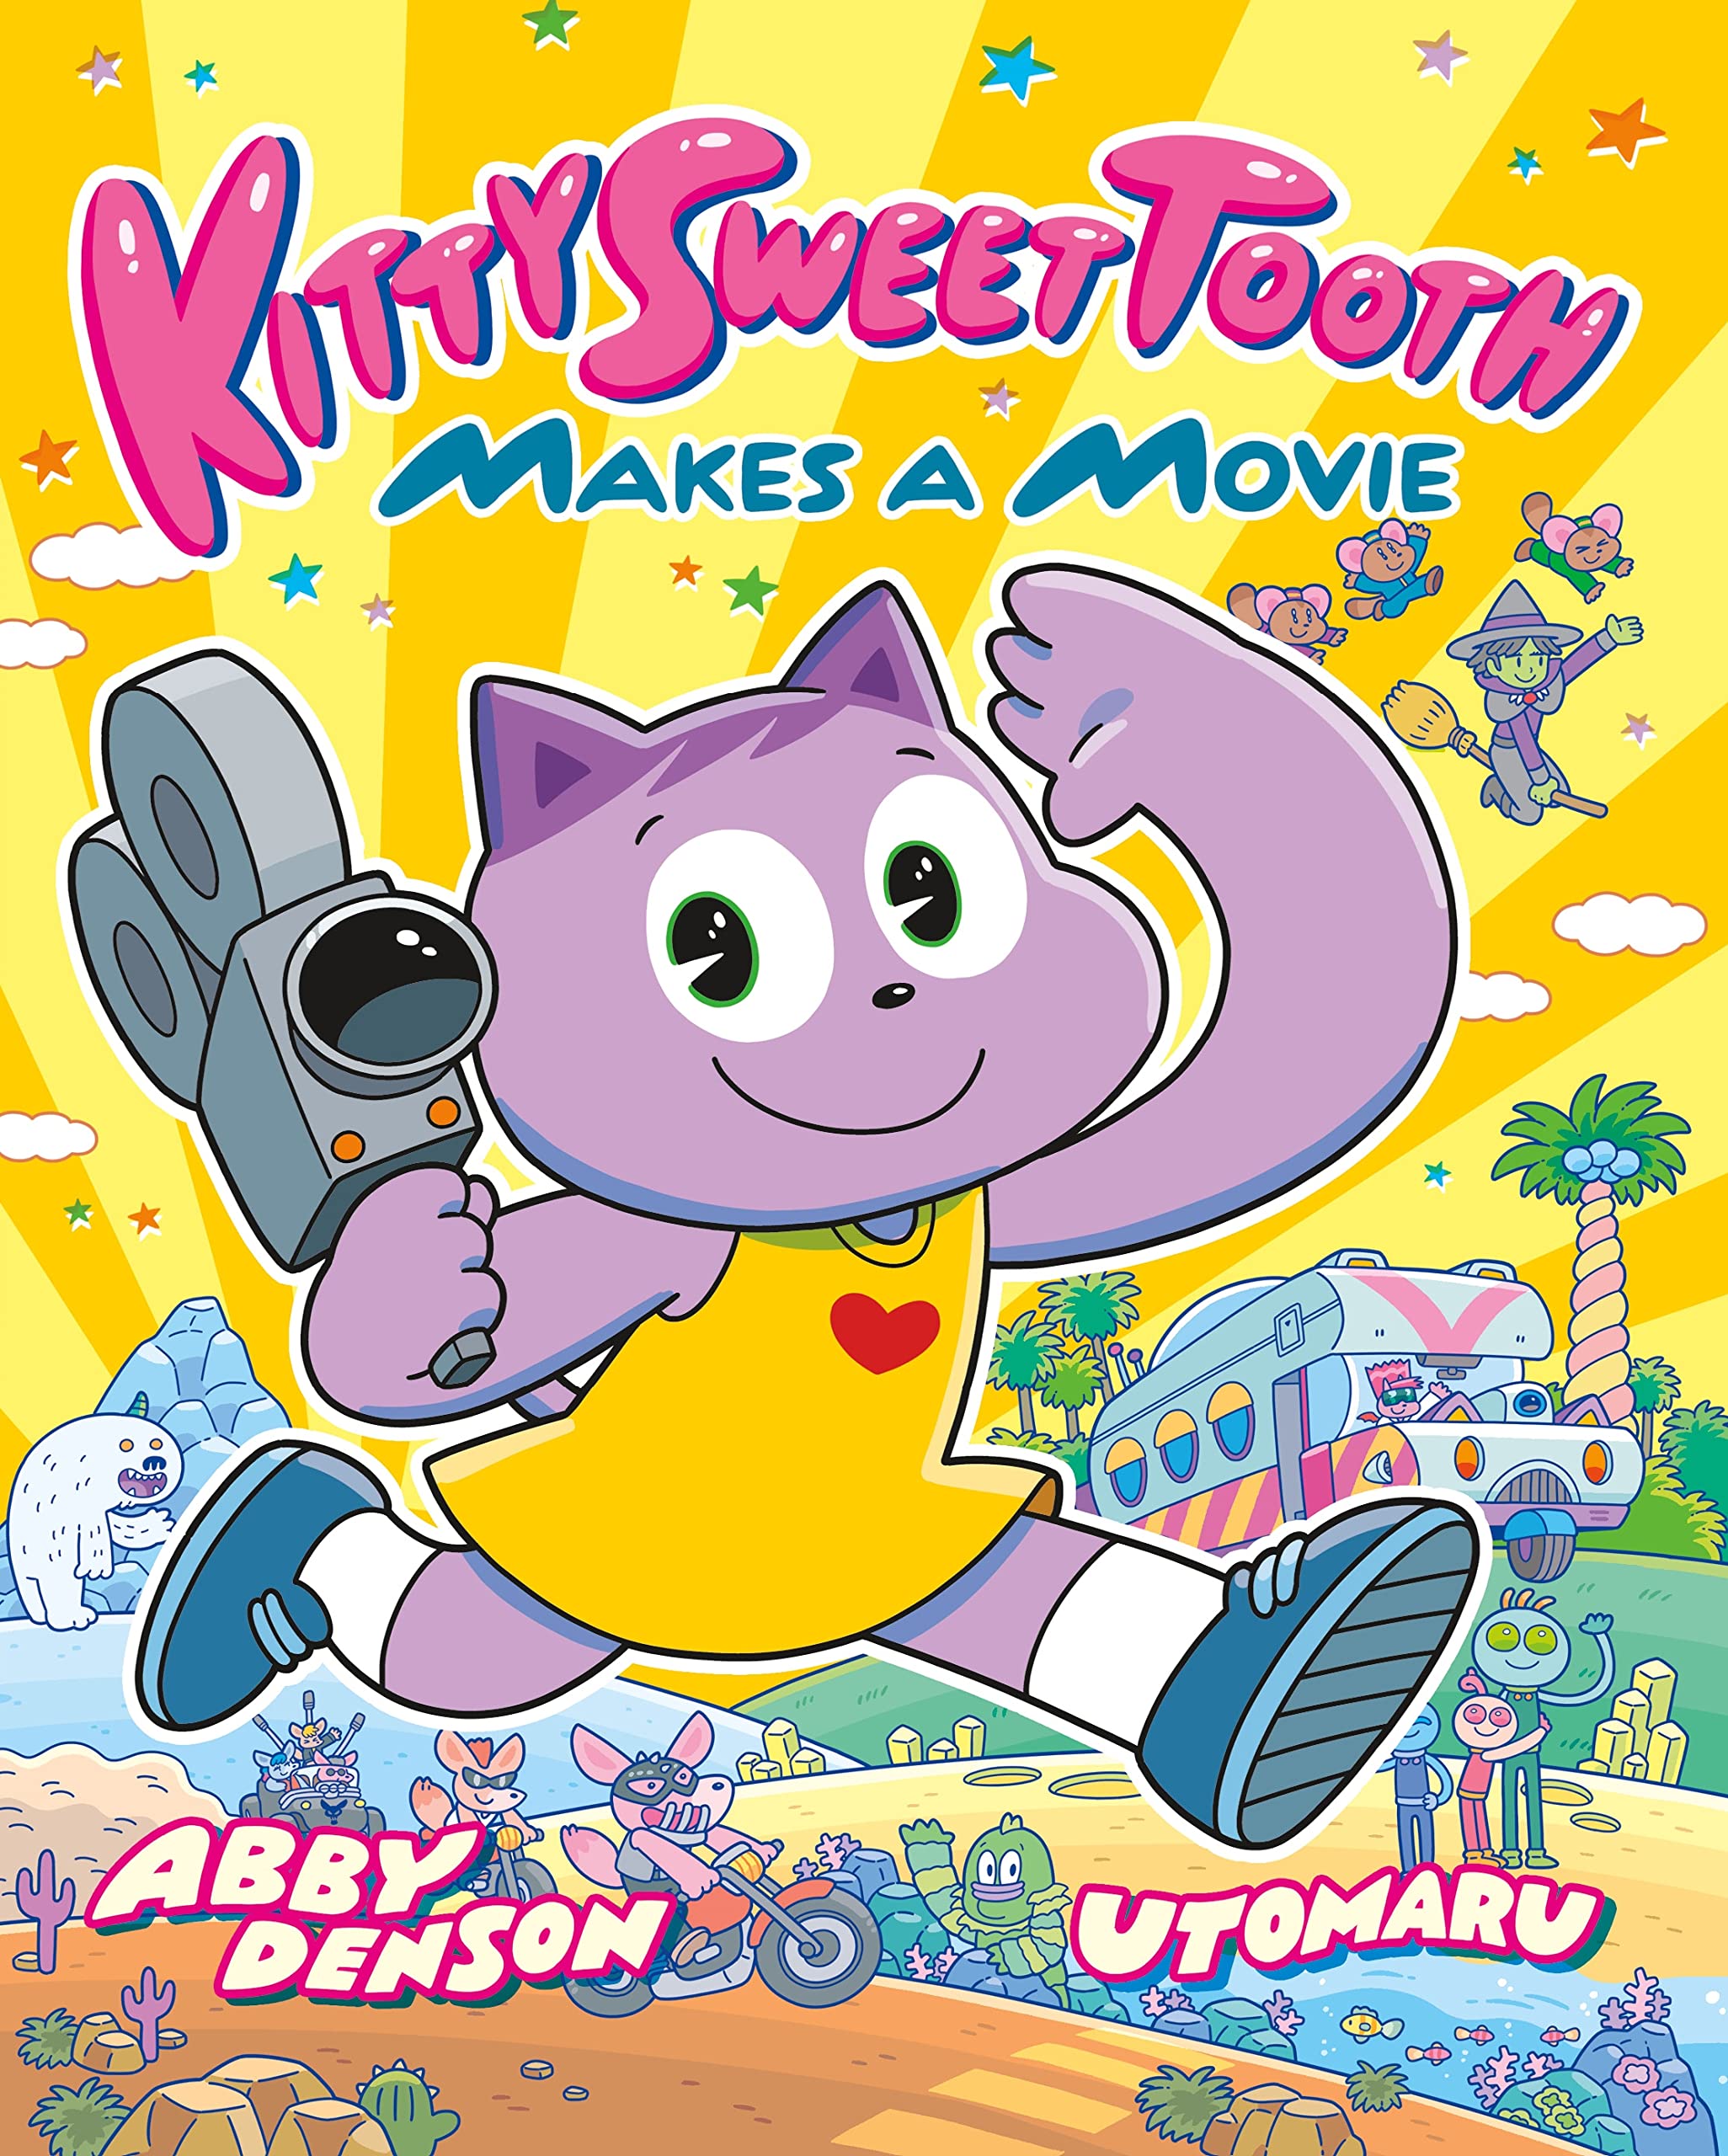 Kitty Sweet Tooth Makes a Movie cover art